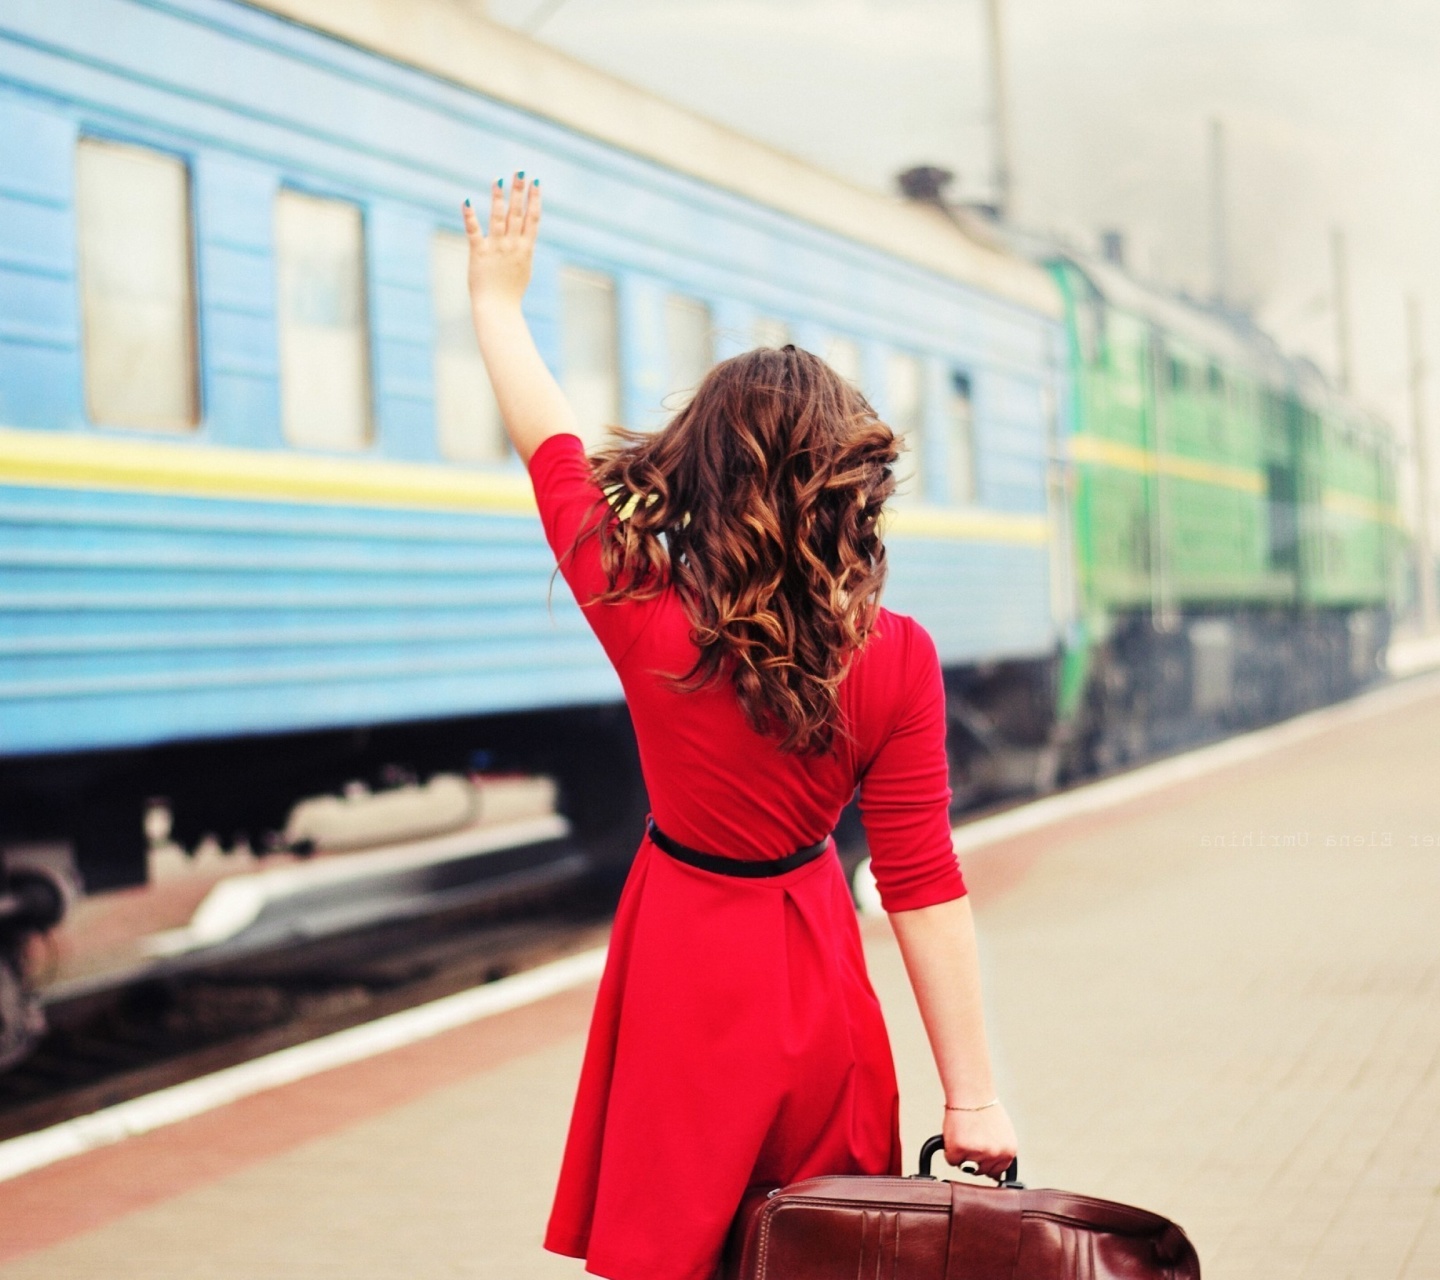 Das Girl traveling from train station Wallpaper 1440x1280